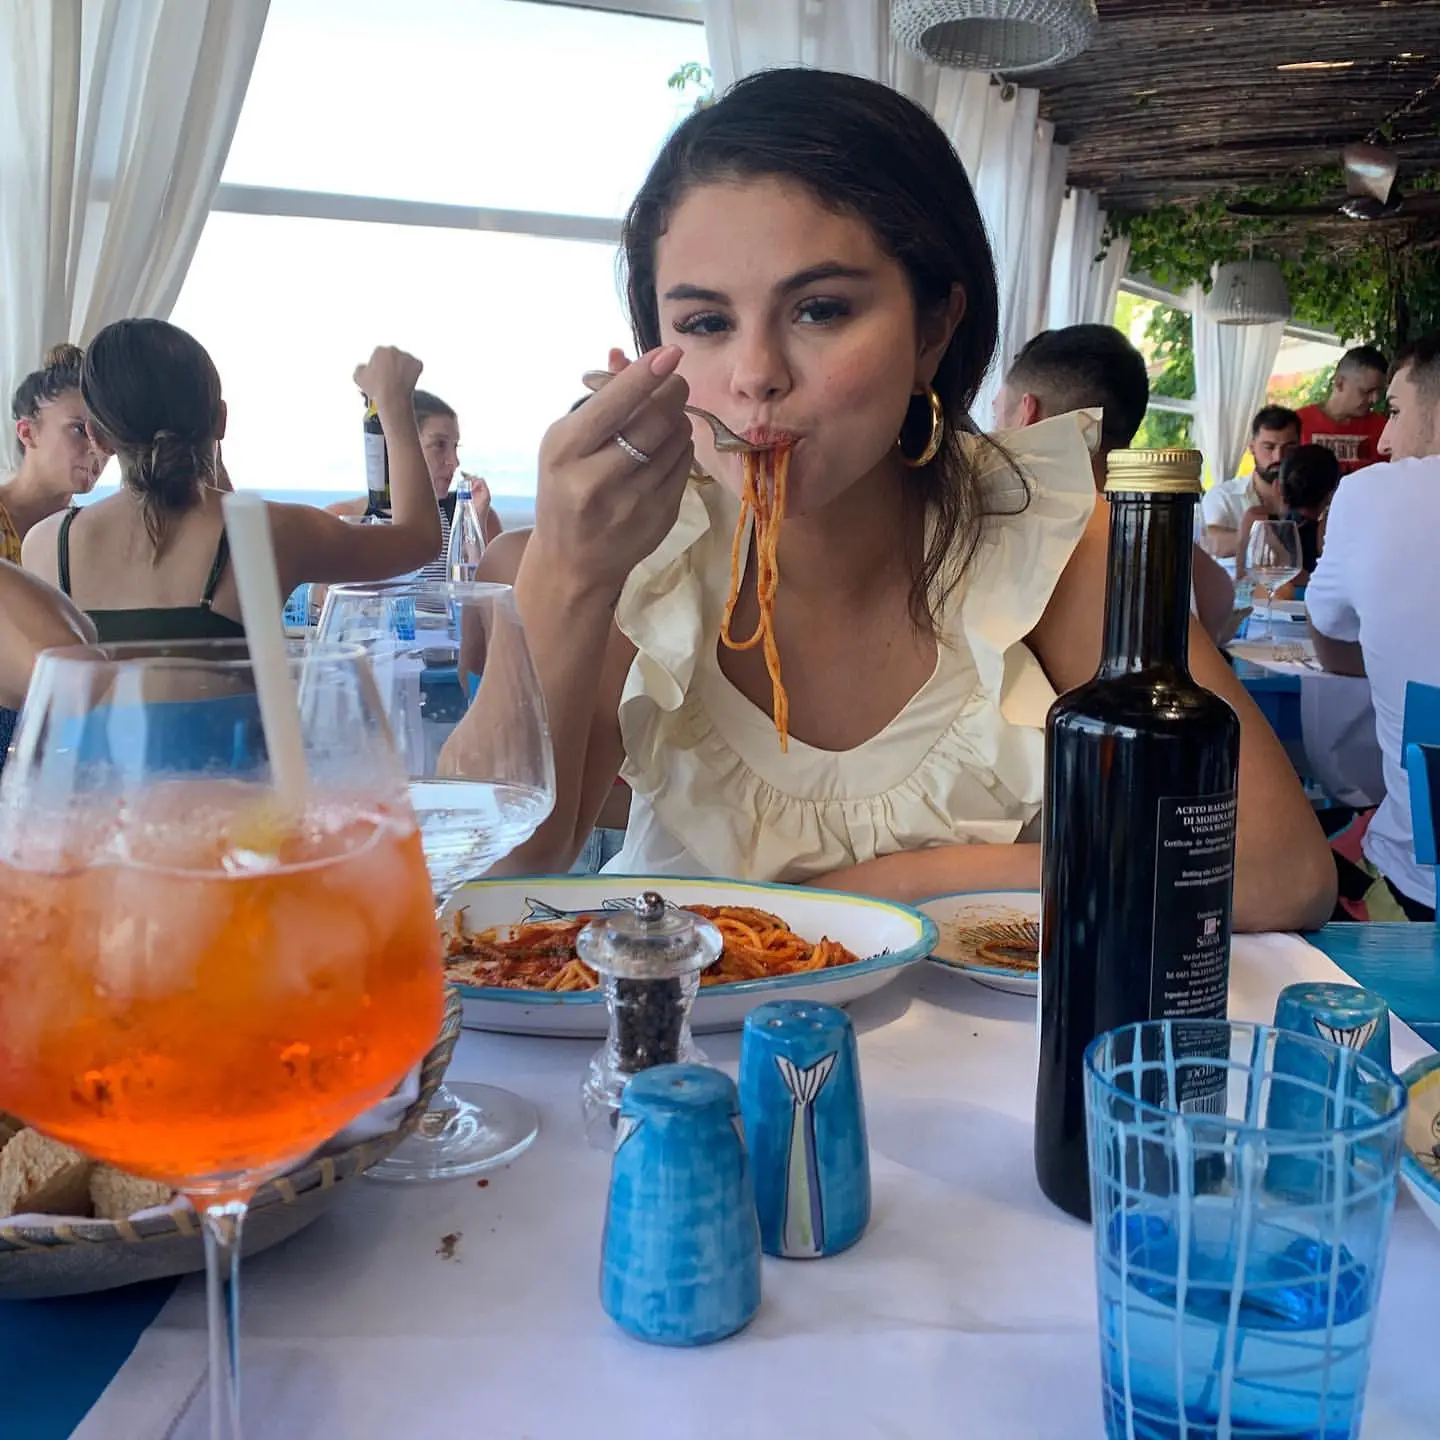 This Diet Plan By Selena Gomez Can Make You Have The Perfect Figure!